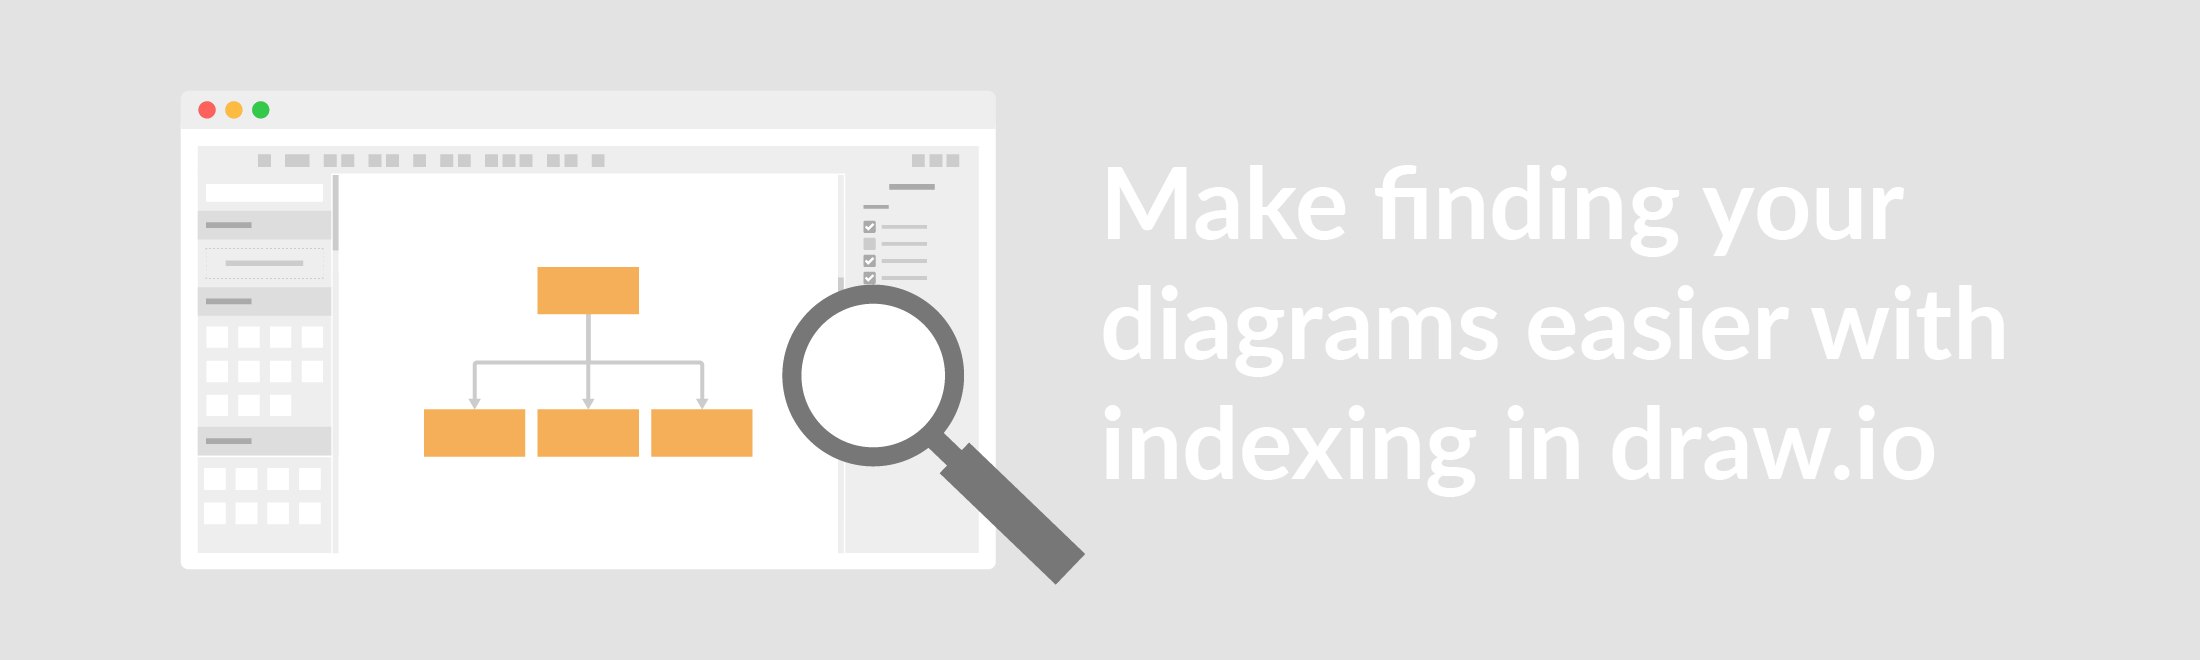 indexing in drawio